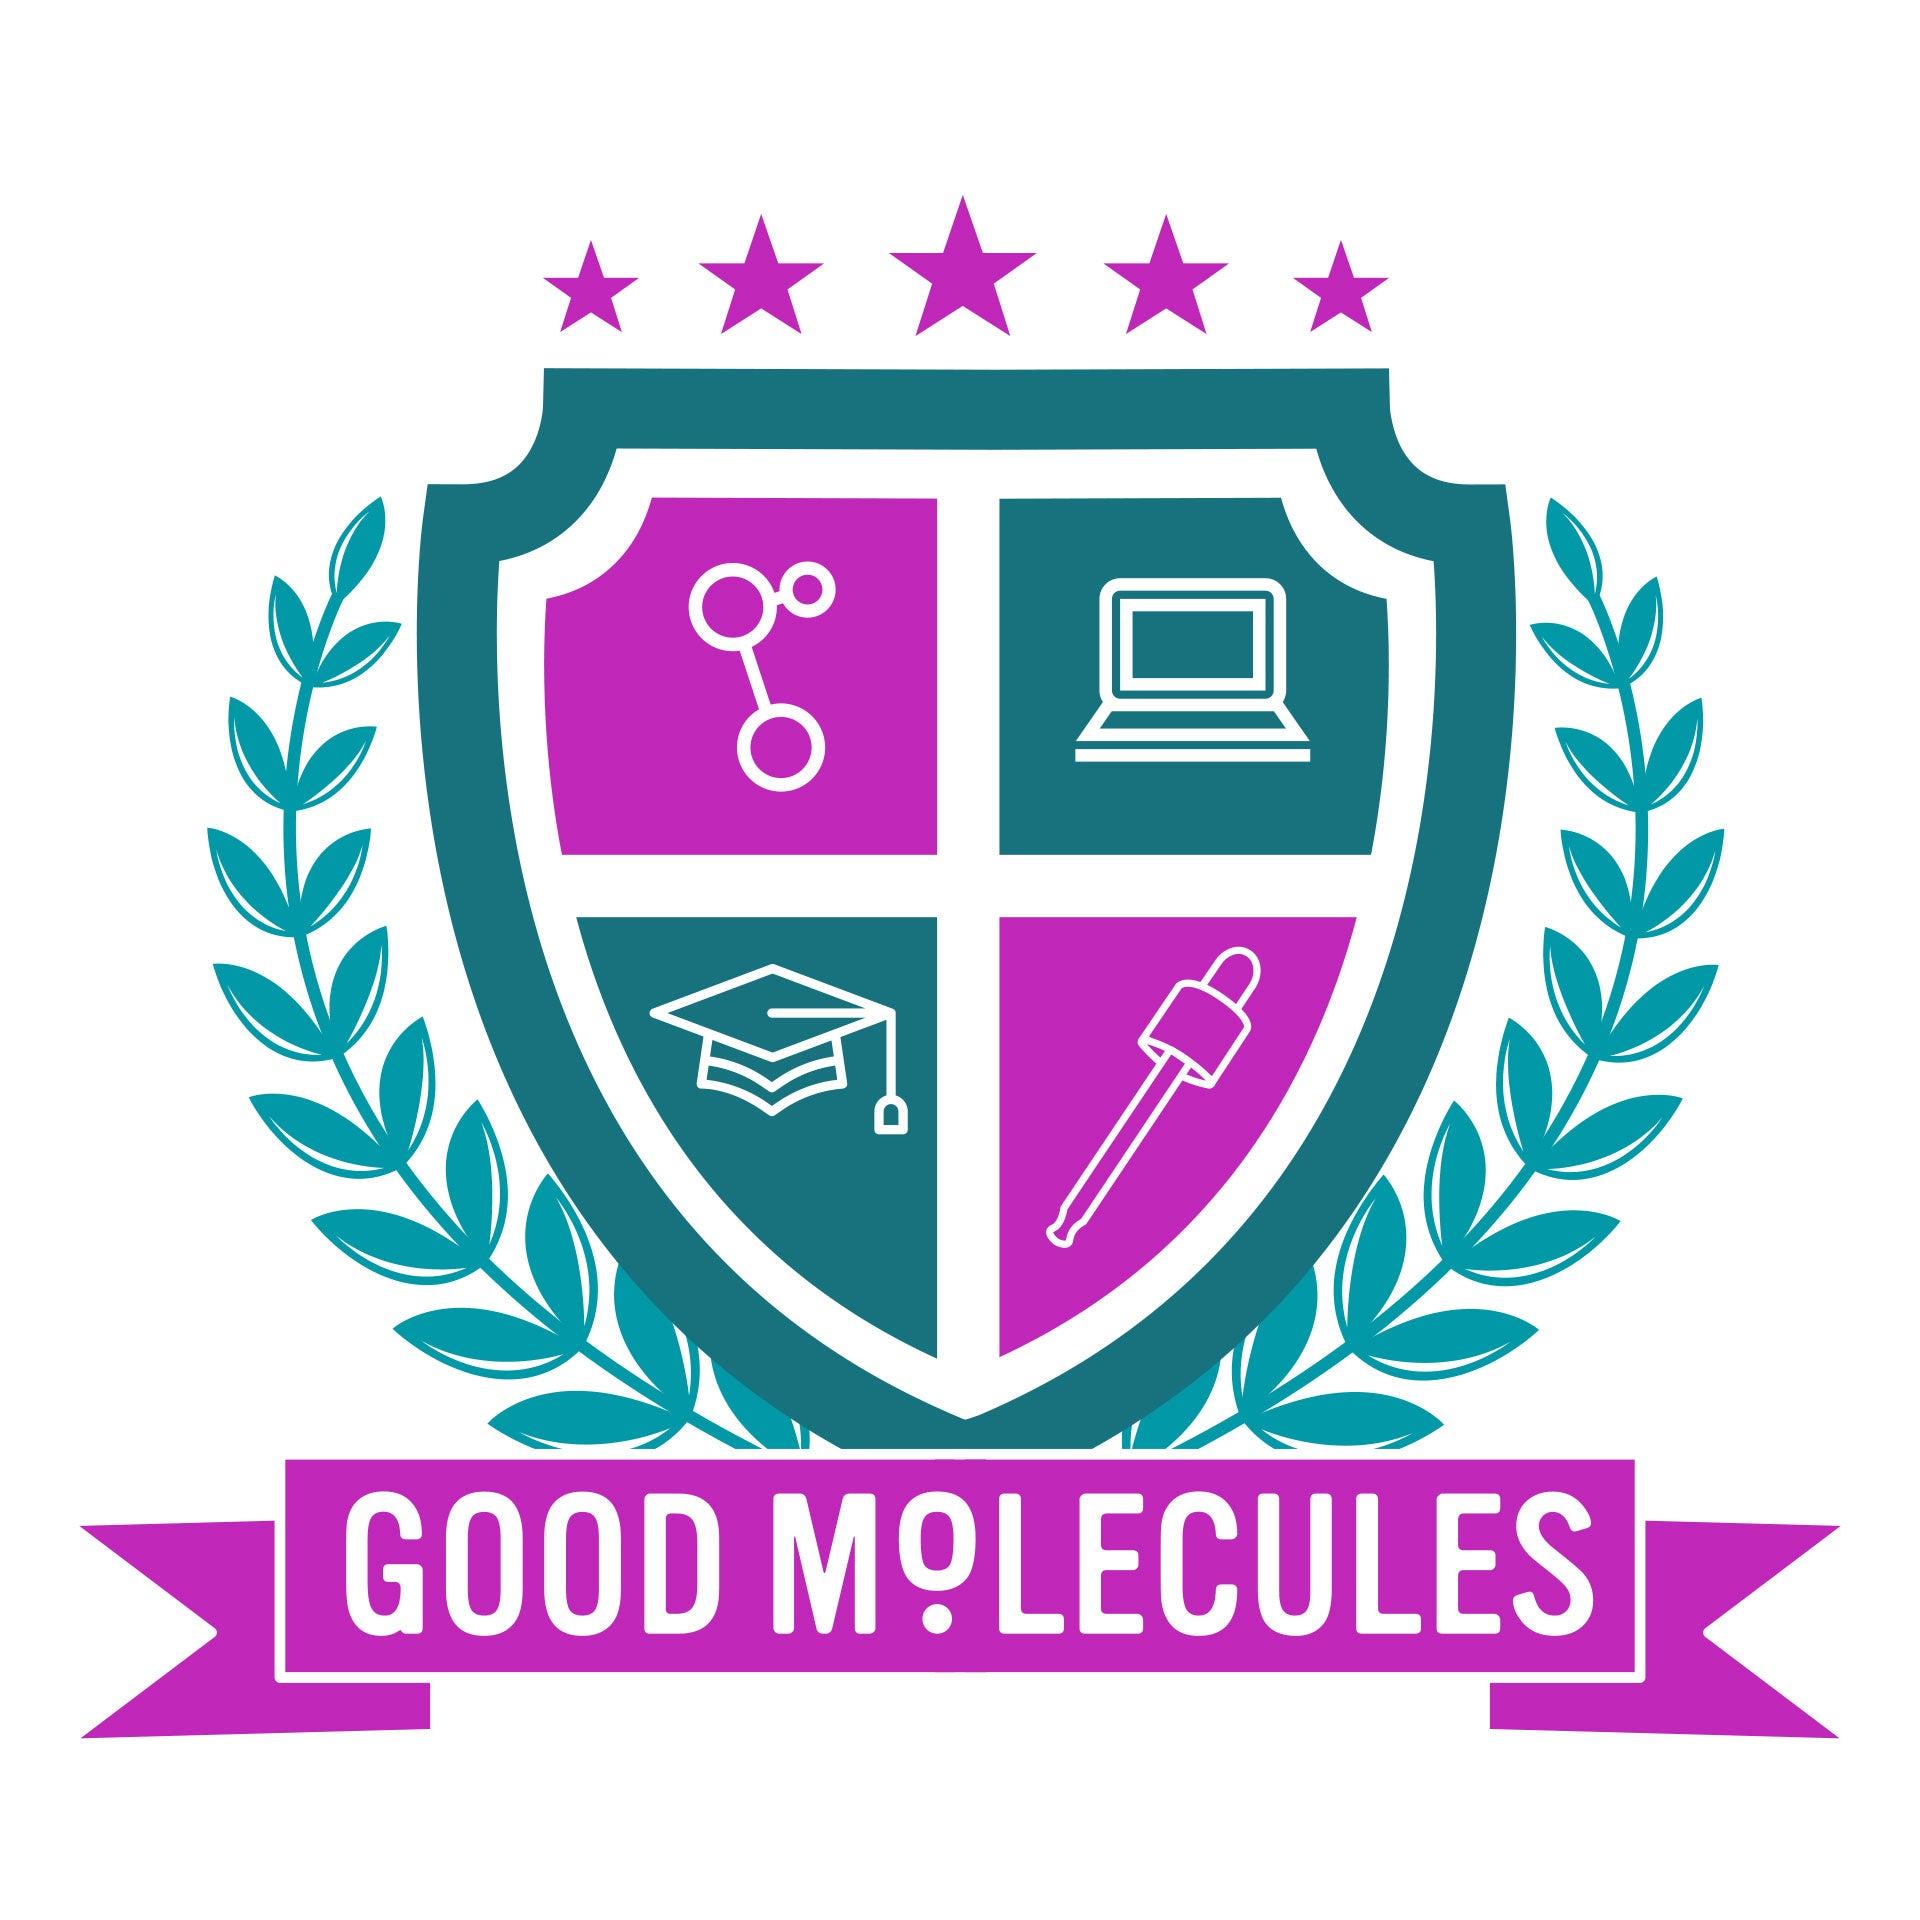 Good Molecules is coming to the University of North Carolina - Chapel Hill!